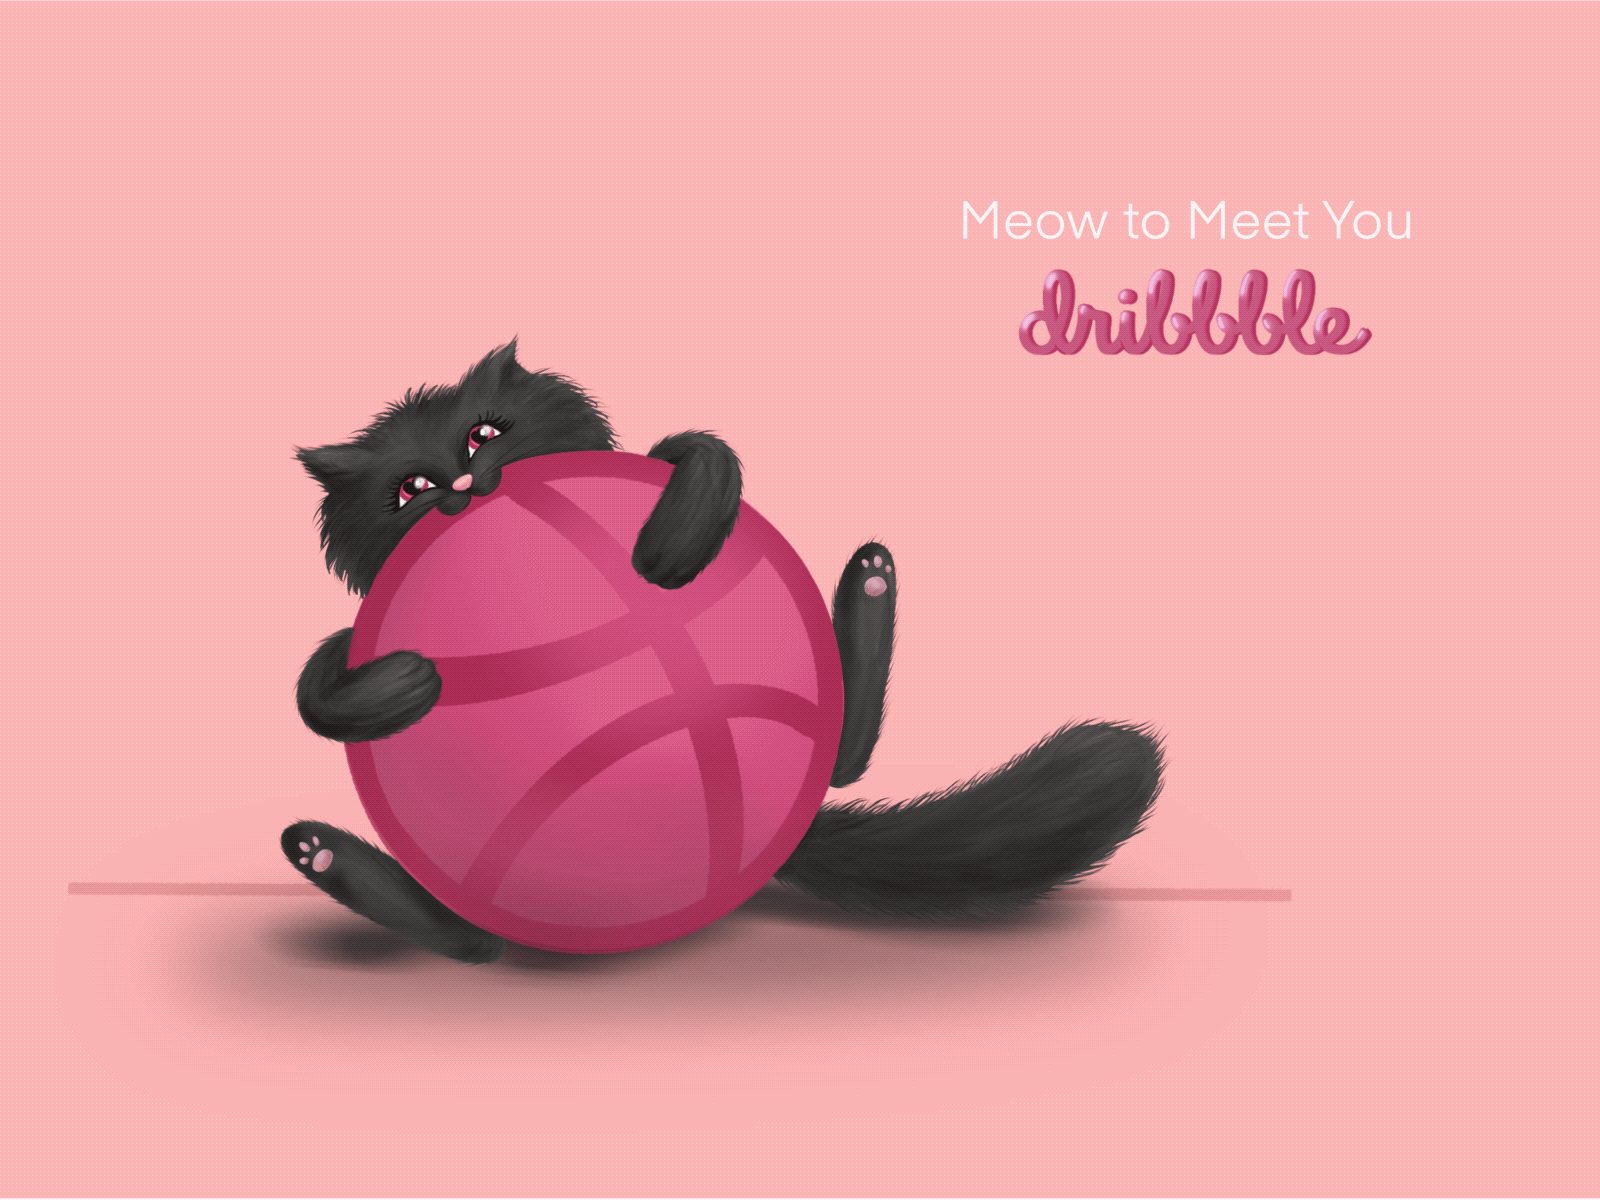 Meow to Meet You, Dribbble! graphic design illustration